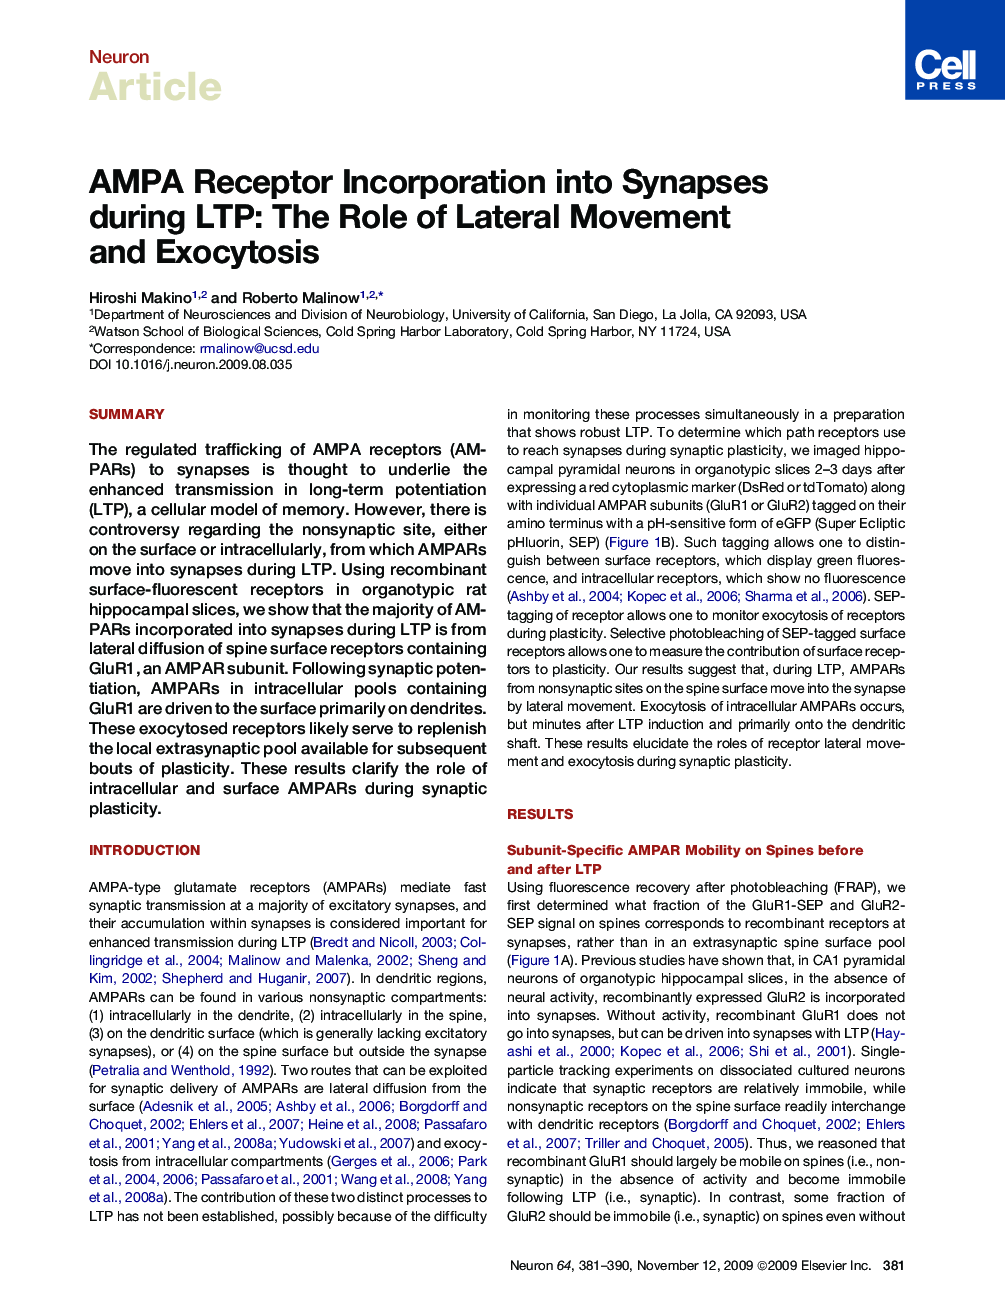 AMPA Receptor Incorporation into Synapses during LTP: The Role of Lateral Movement and Exocytosis